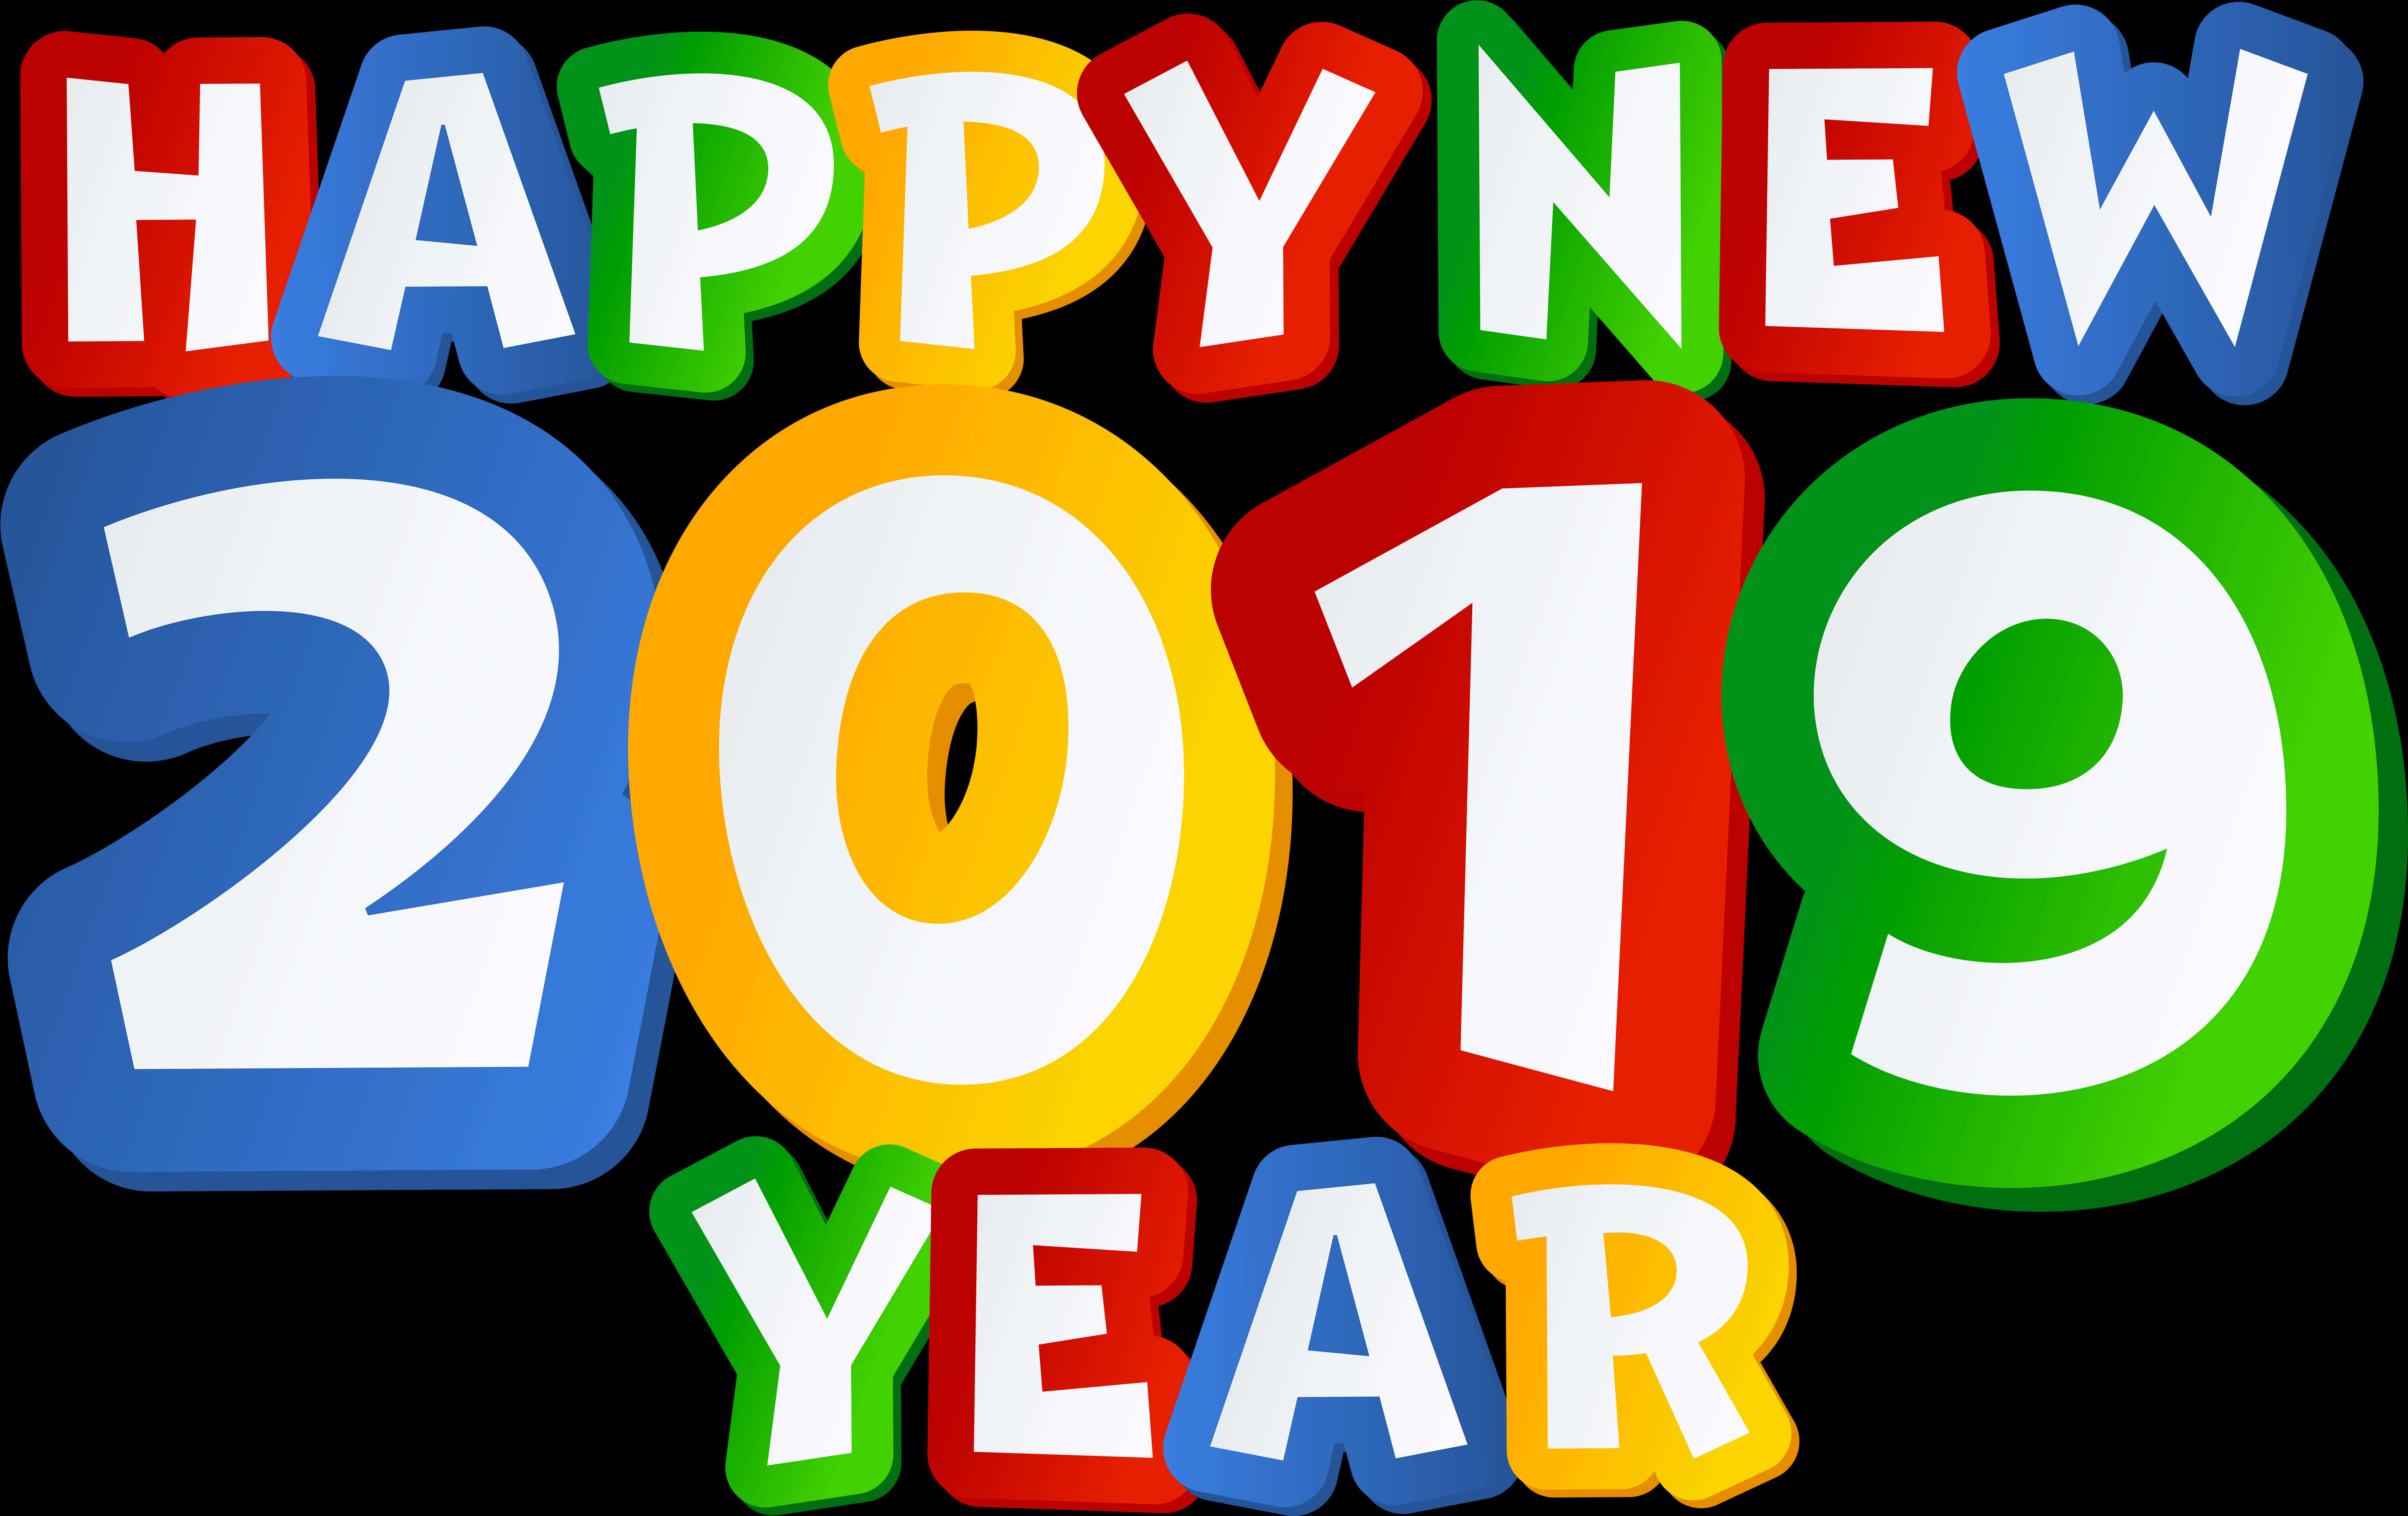 Colorful Happy New Year2019 Celebration PNG image